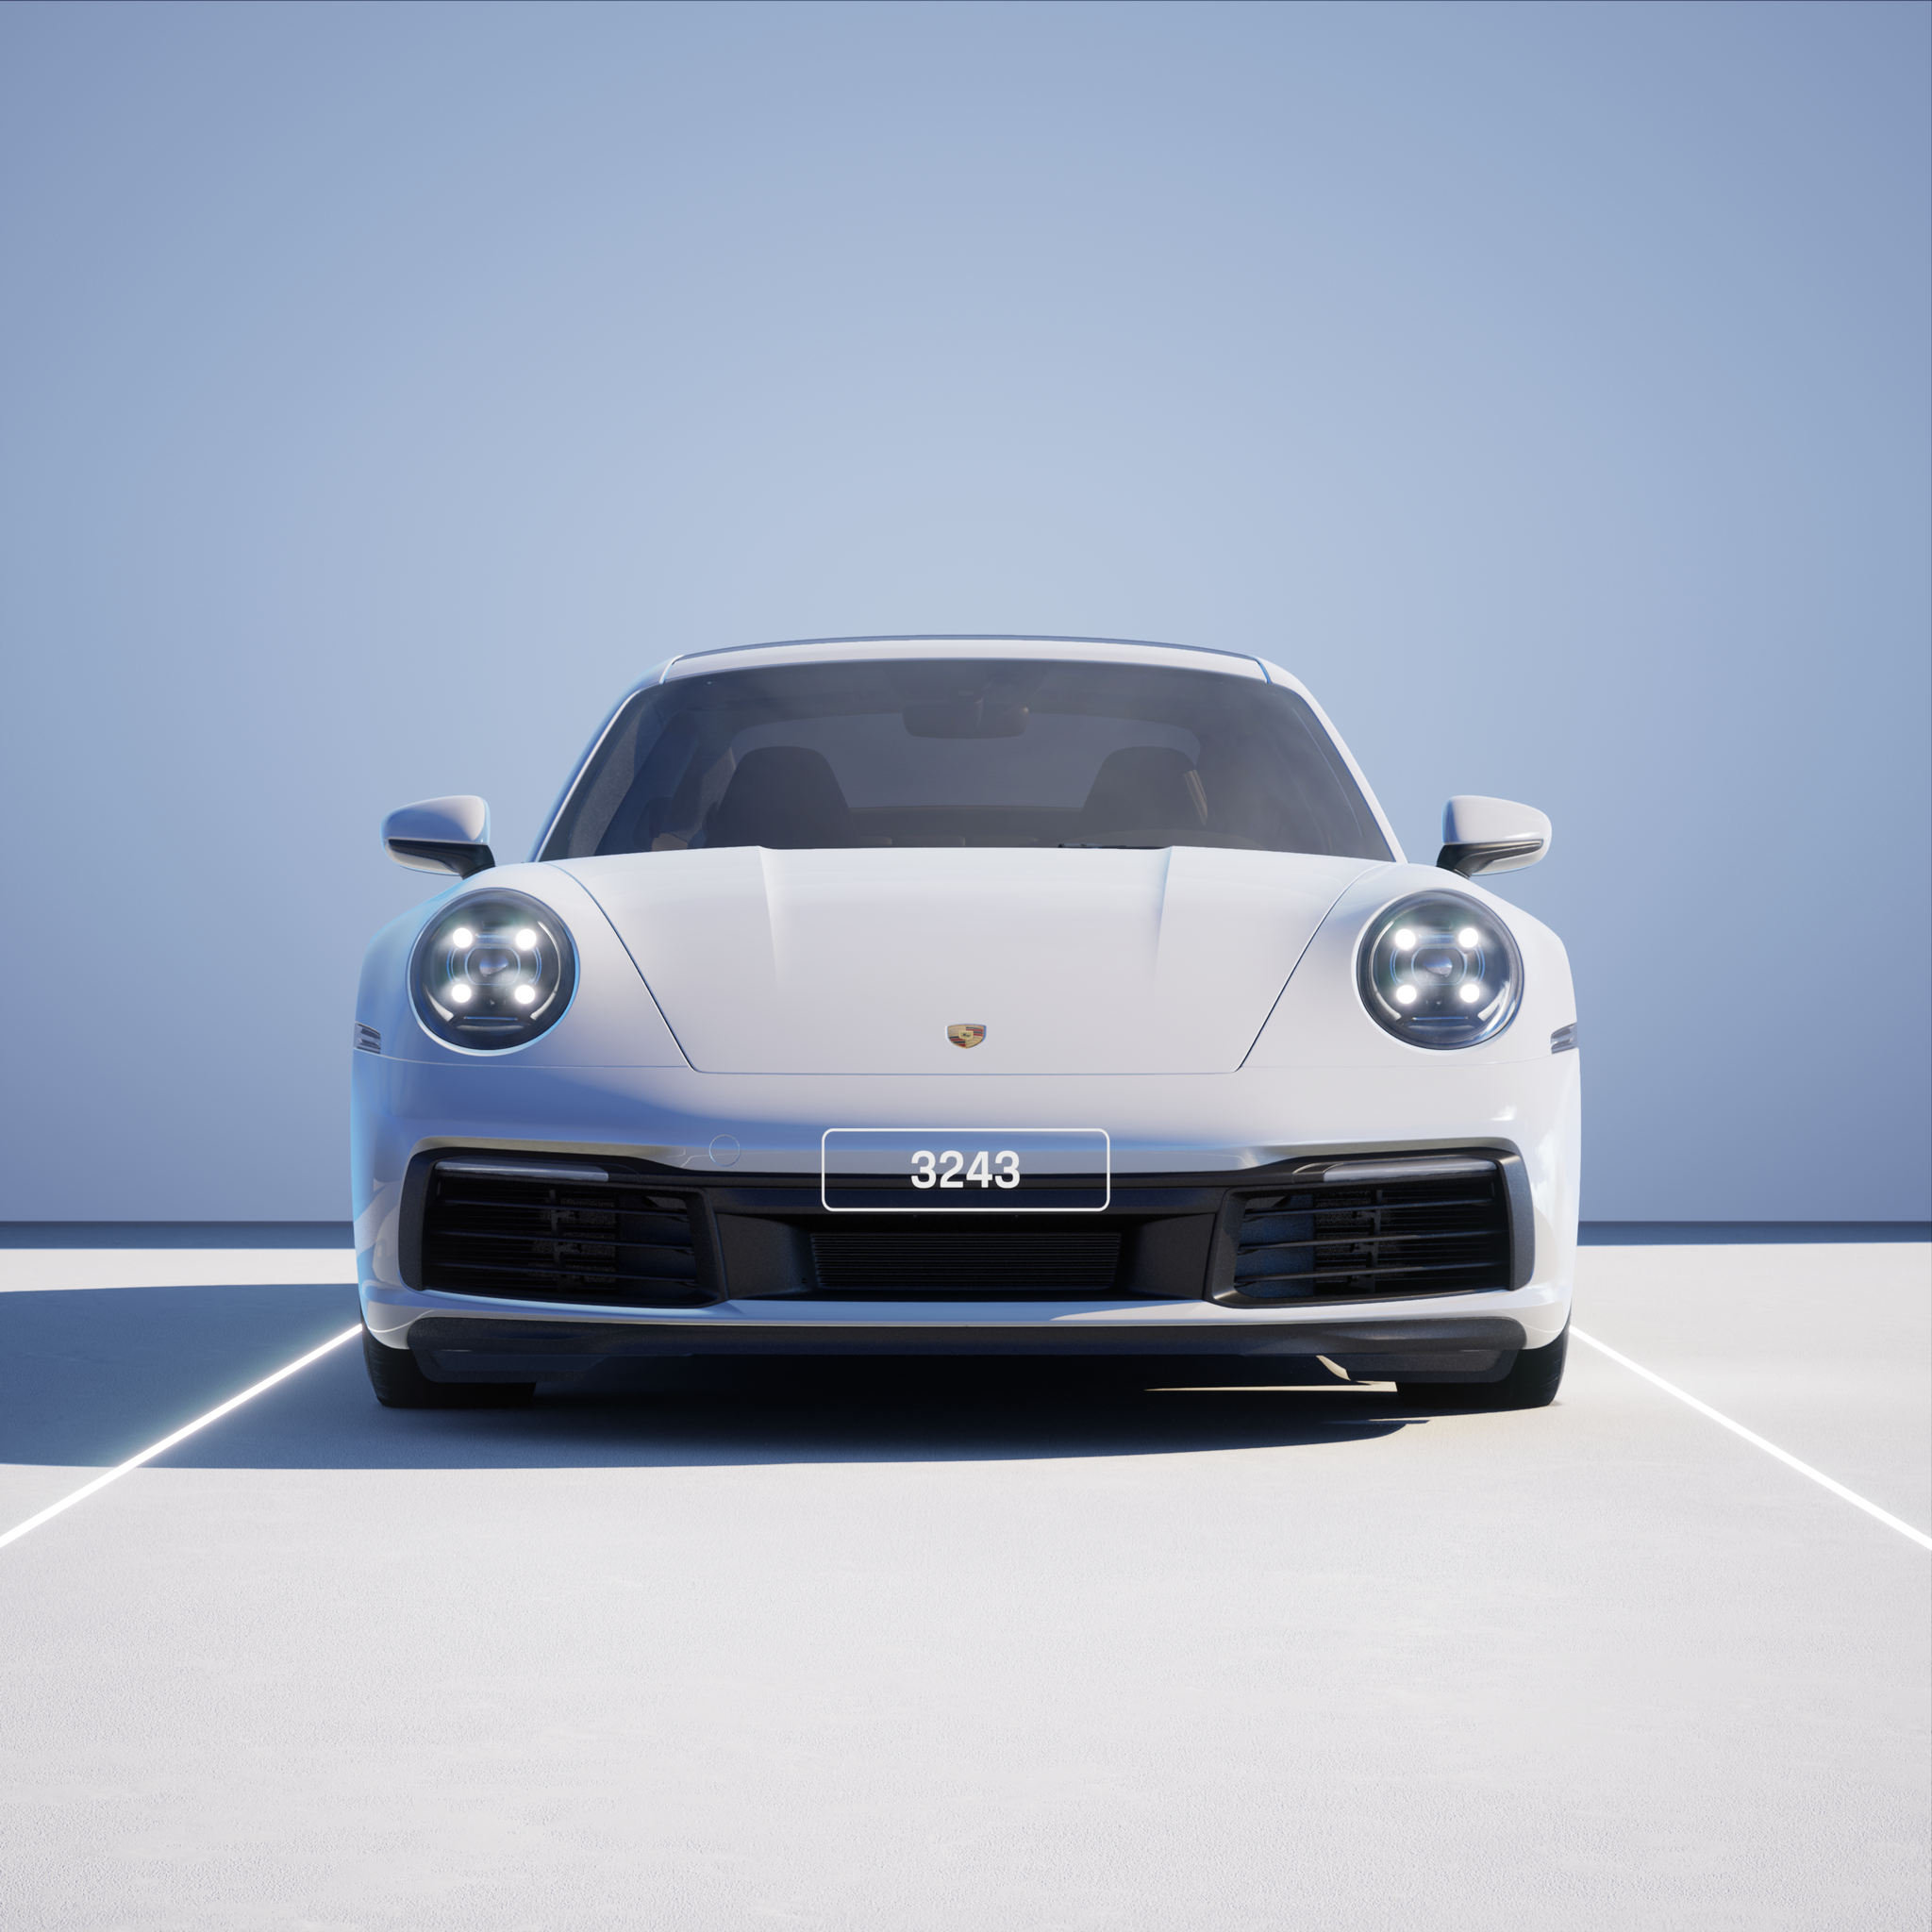 The PORSCHΞ 911 3243 image in phase